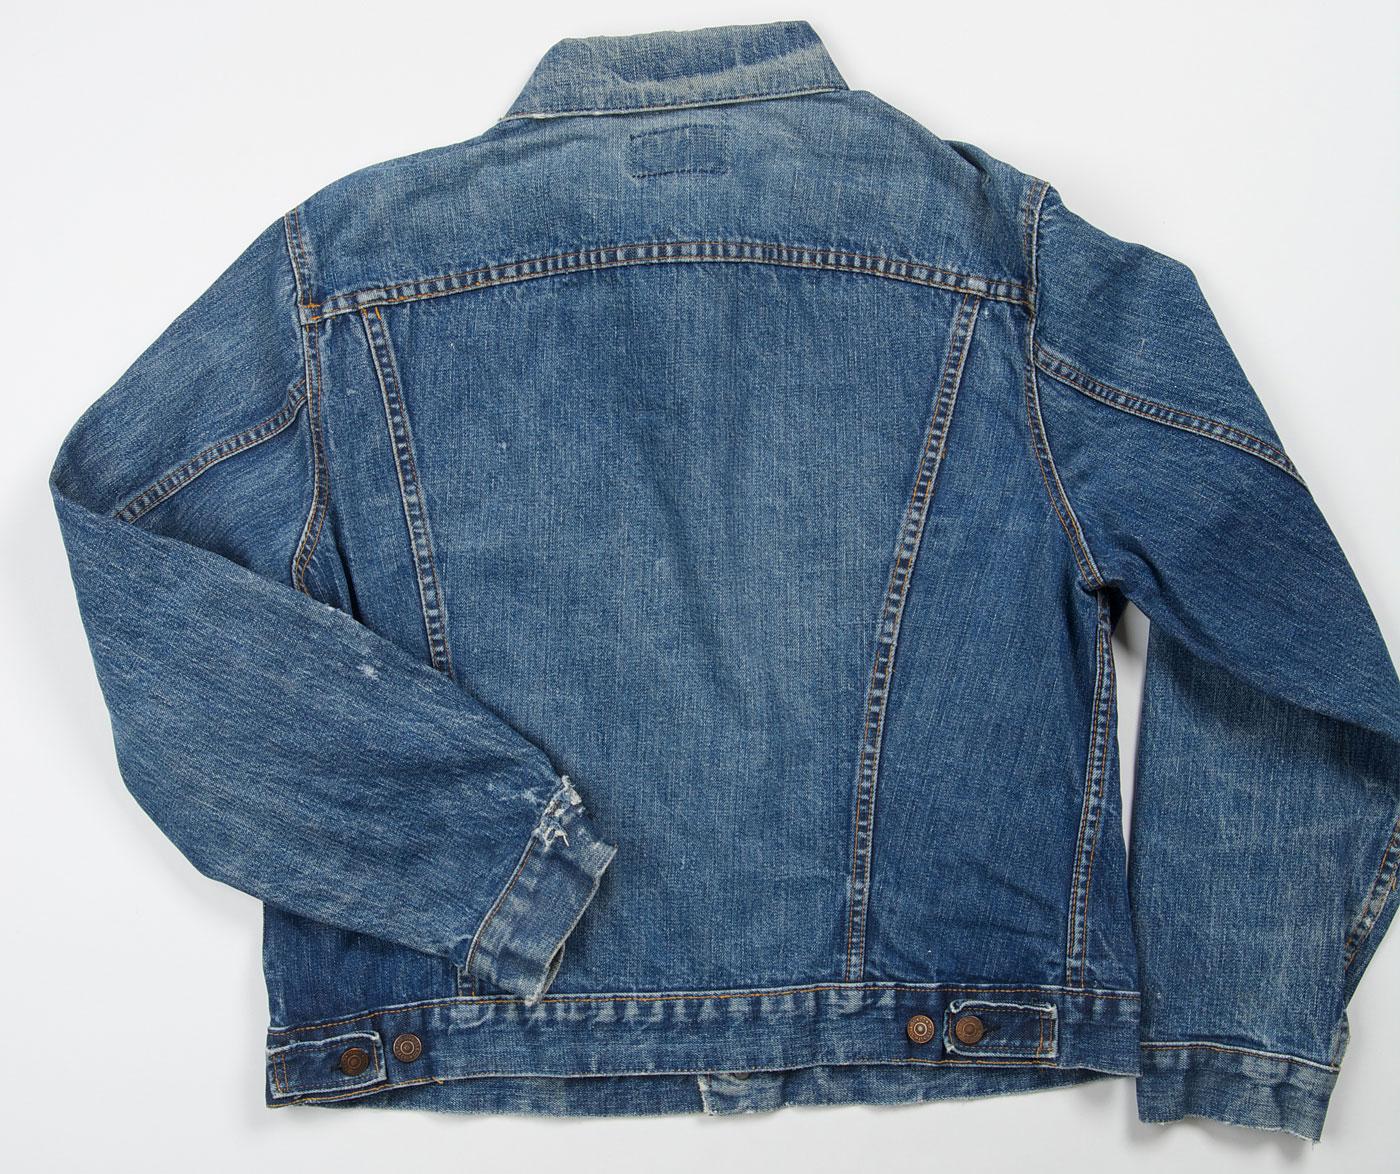 Classic Levi’s Jackets Make a Fashion Statement for the Ages | Art & Object